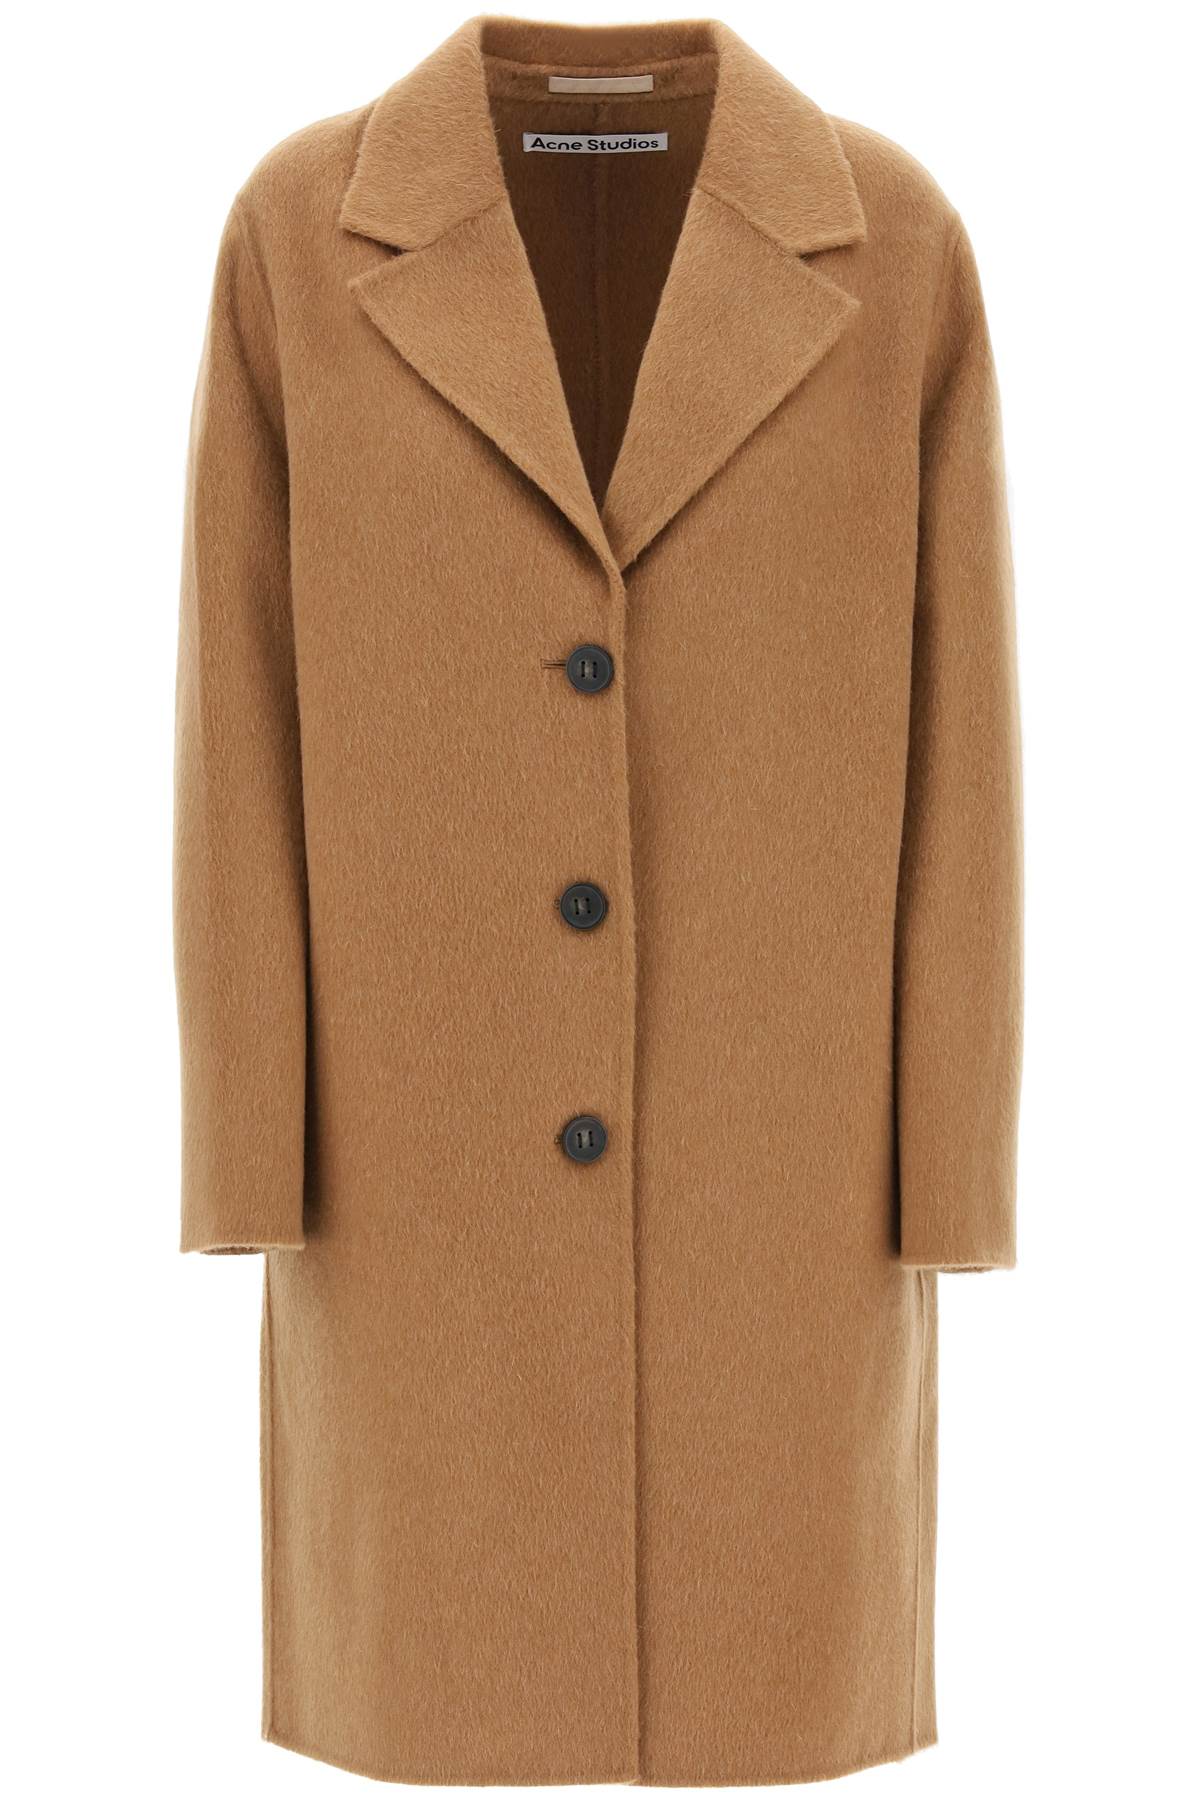 ACNE STUDIOS Soft Wool & Alpaca Midi Jacket for Women - Knee-length, Relaxed Fit